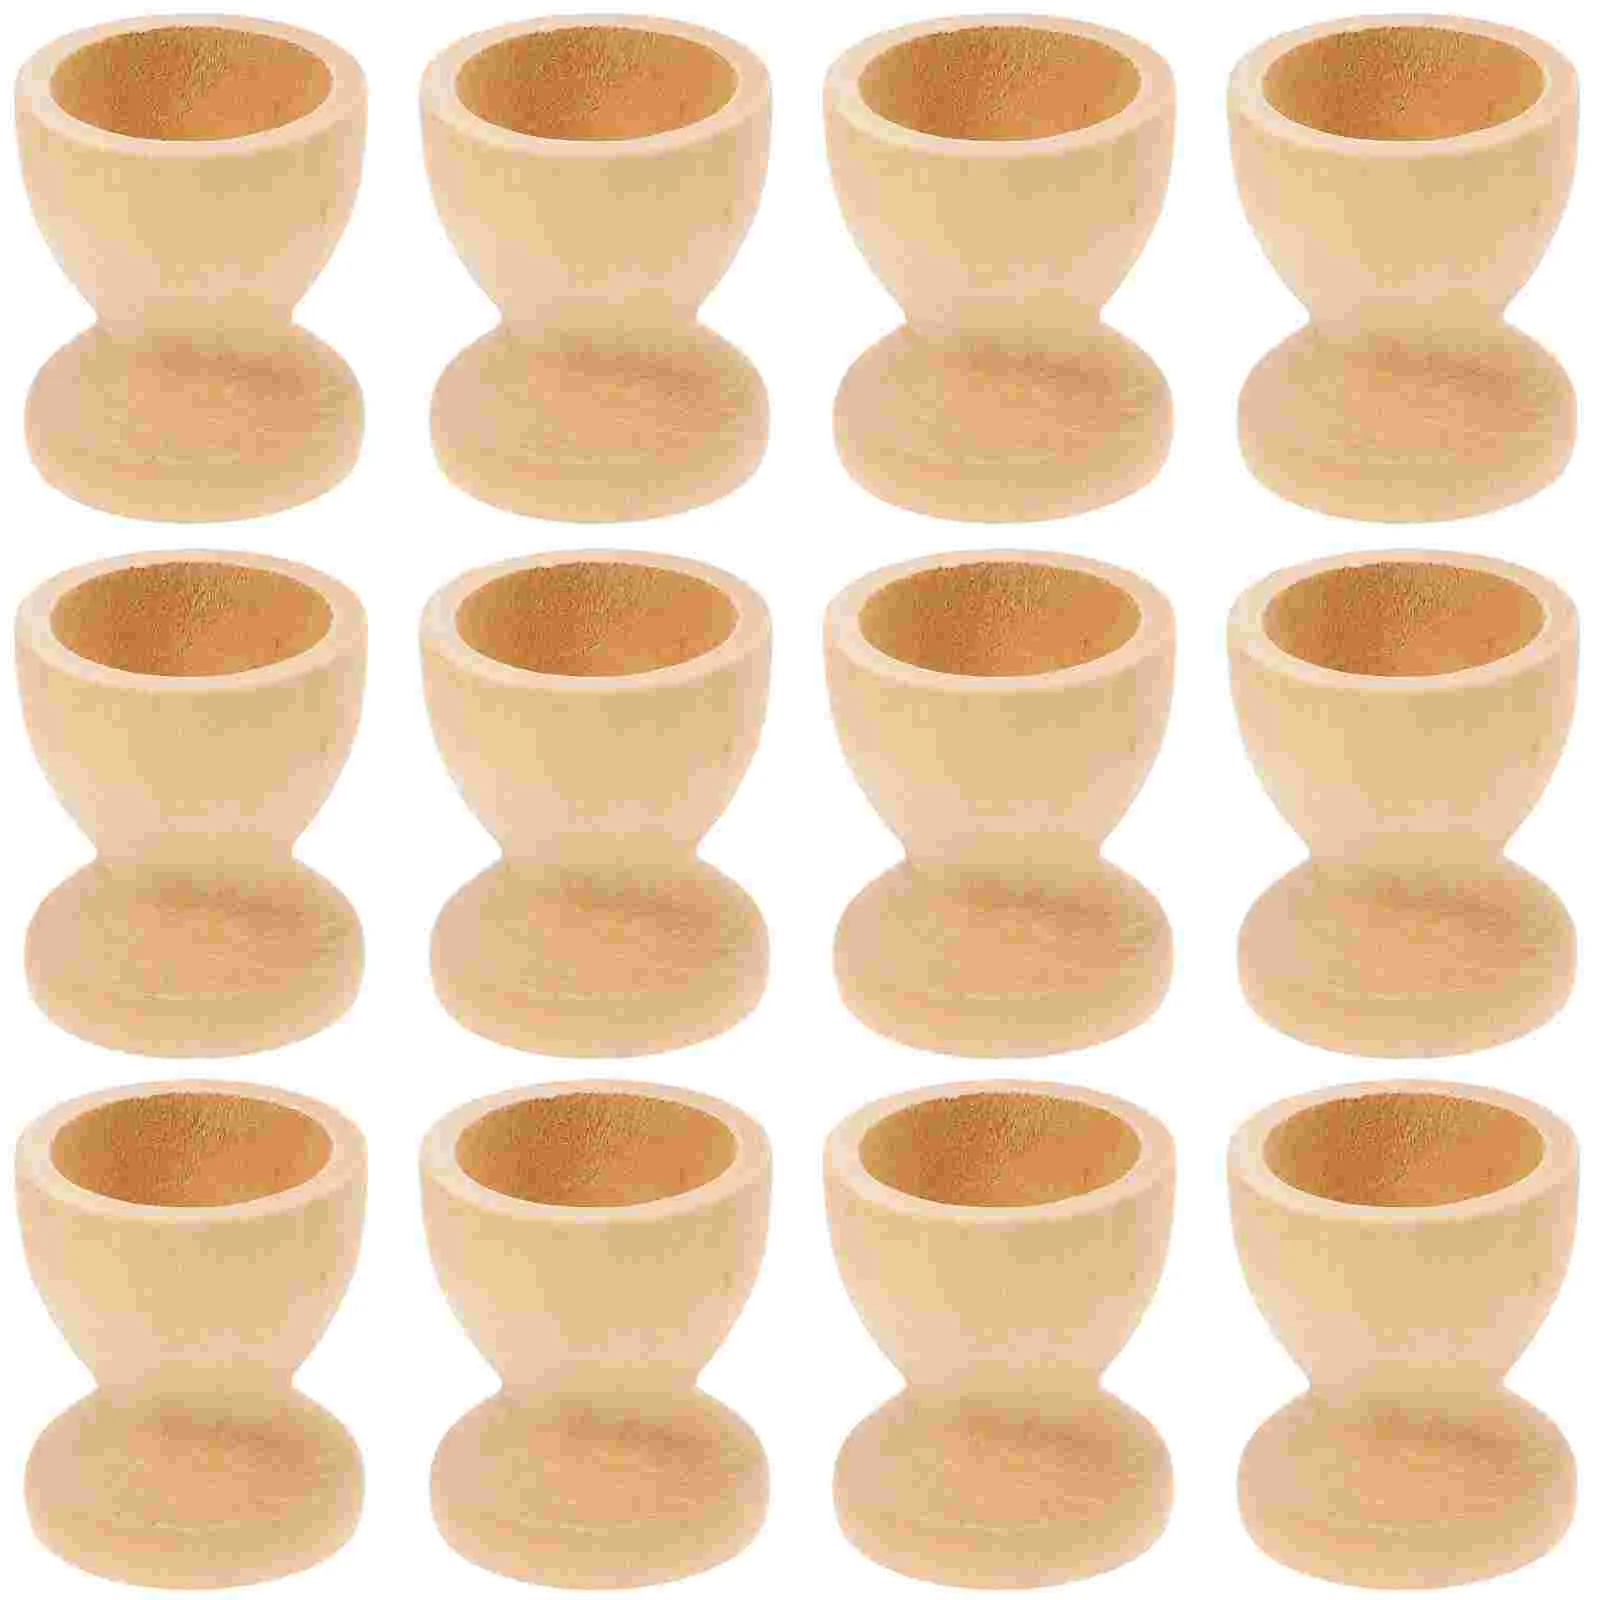 

Egg Holder Wooden Easter Cup Cups Stand Boiled Holders Tray Wood Eggs Unfinished Display Breakfast Kitchen Tools Hard Decorative